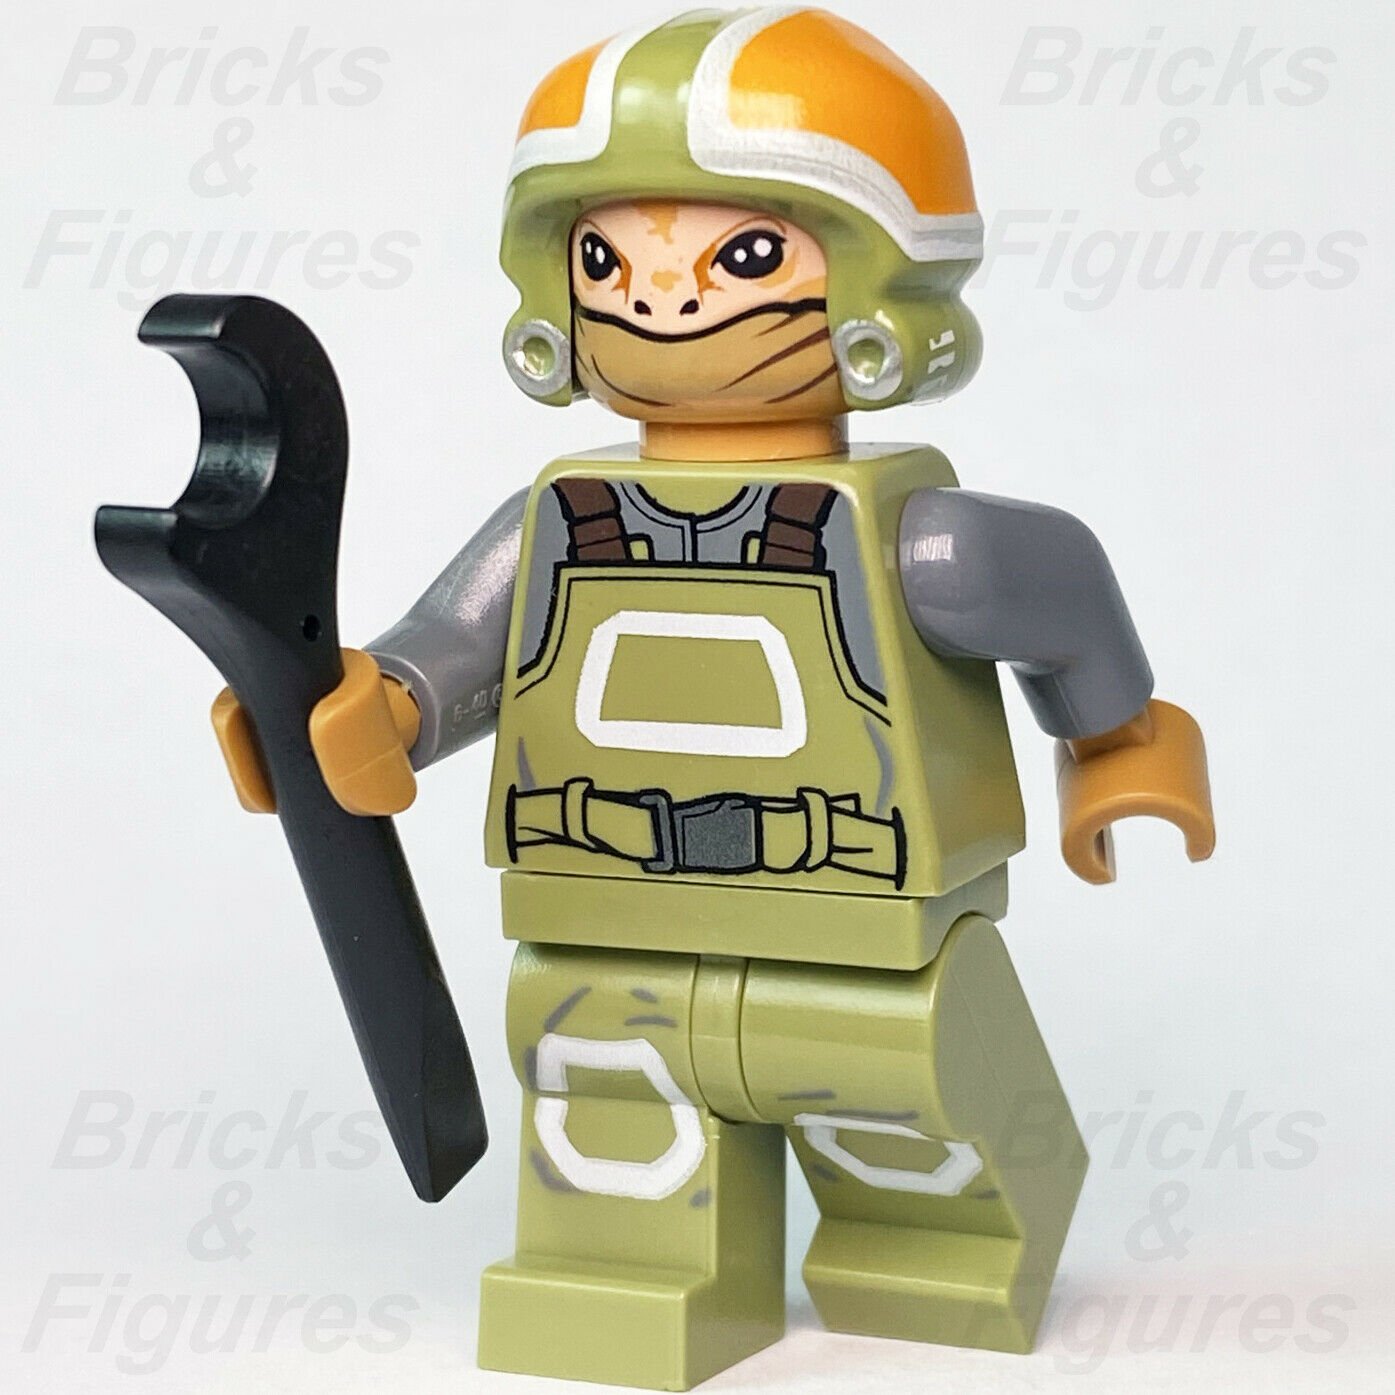 New Star Wars LEGO Resistance Ground Crew with Wrench Minifigure 75102 - Bricks & Figures